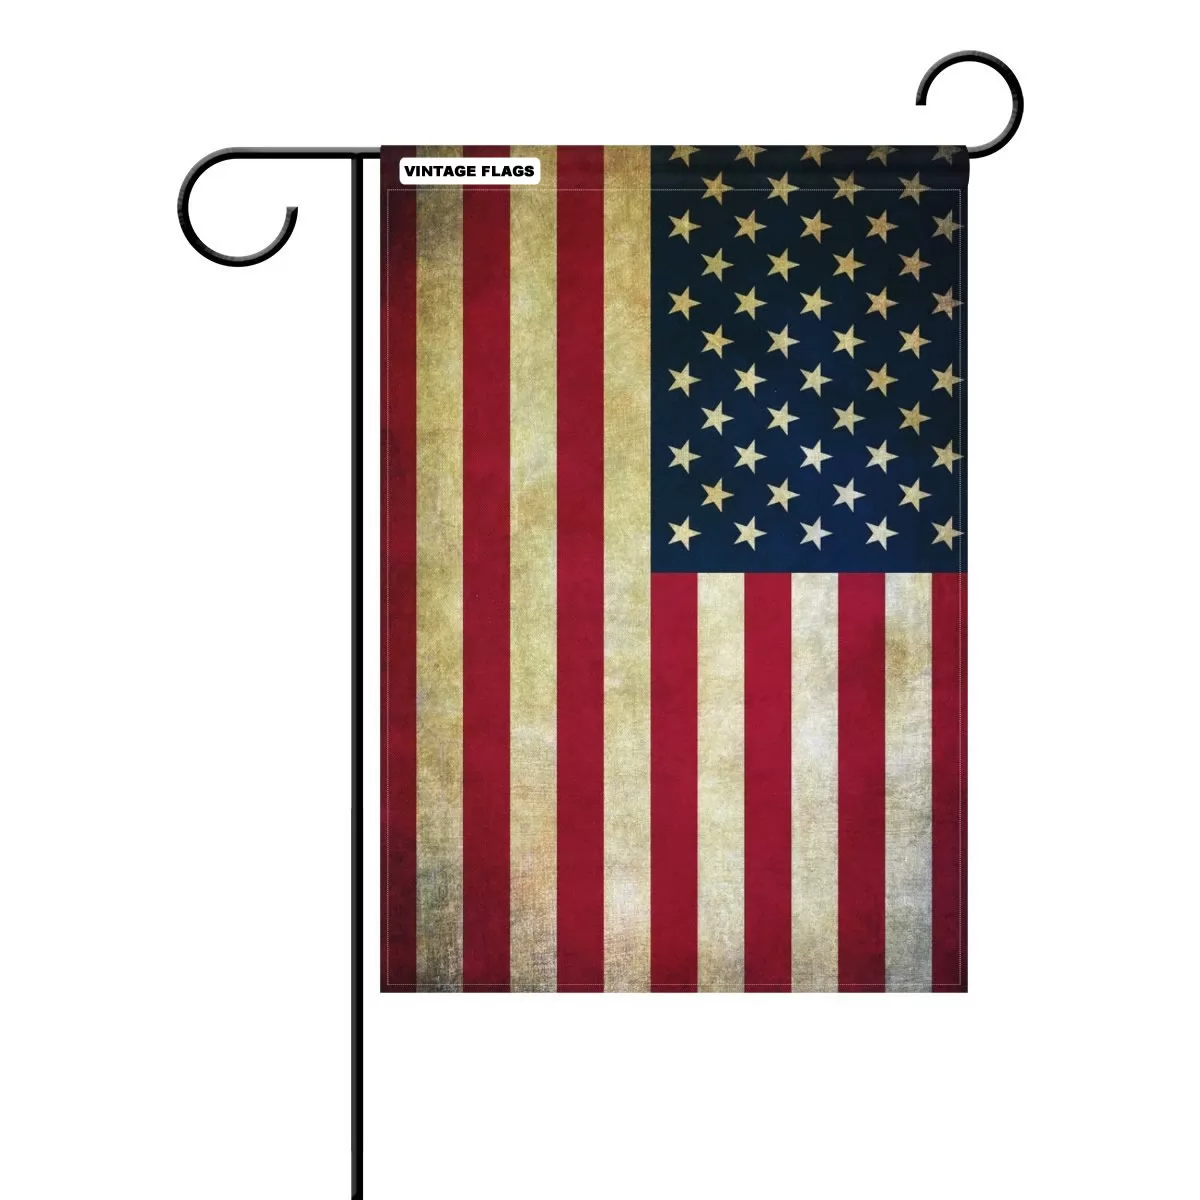 VINTAGE FLAGS Tea Stained American Vintage Garden Yard Flags Banner 12.5x18 Inches